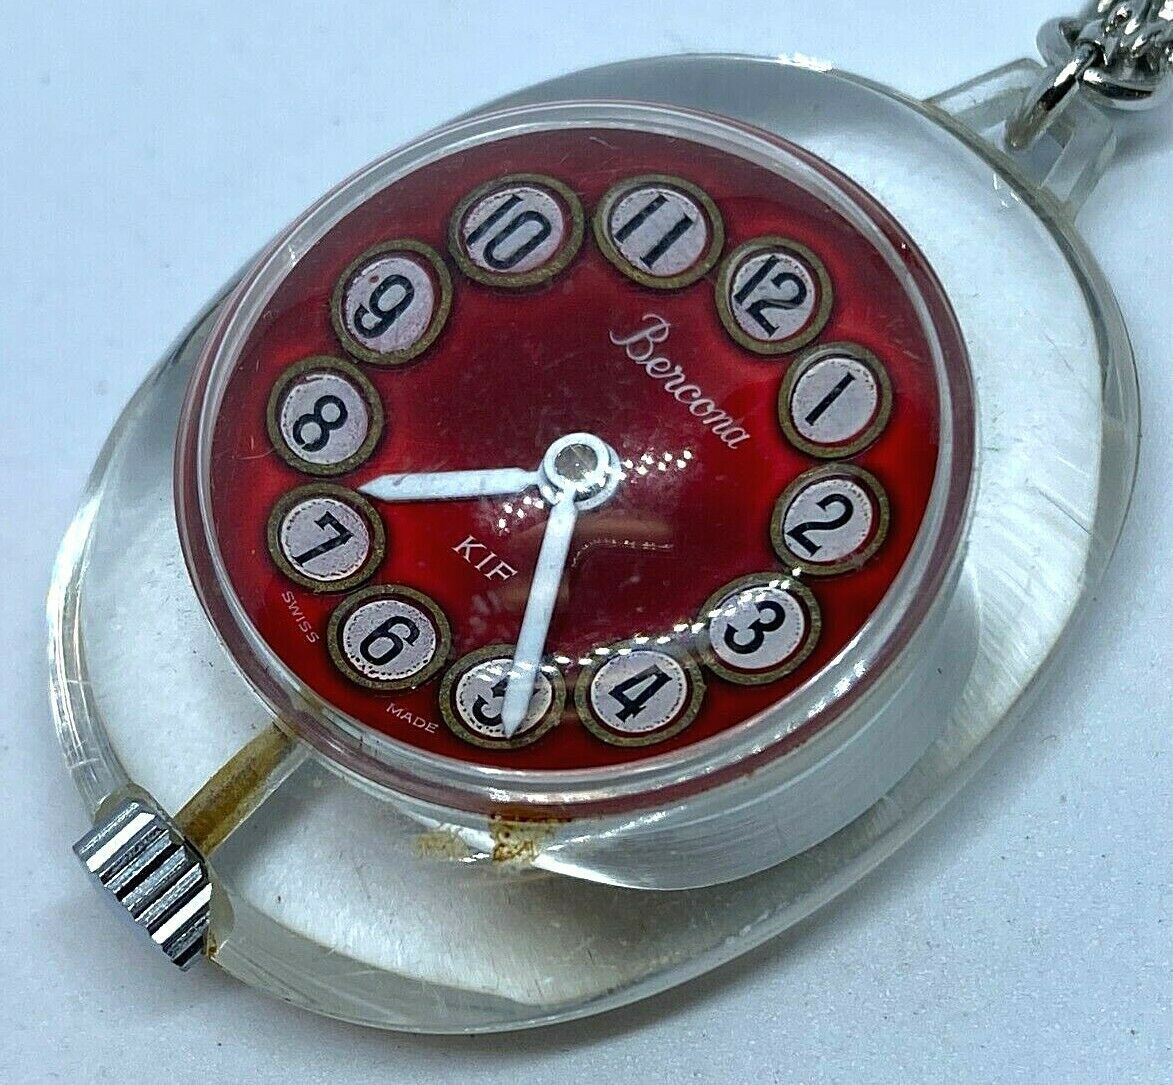 Primary image for VTG Bercona KIF Lady Clear Bubble Hand-Wind Necklace Pendant Pocket Watch Hours